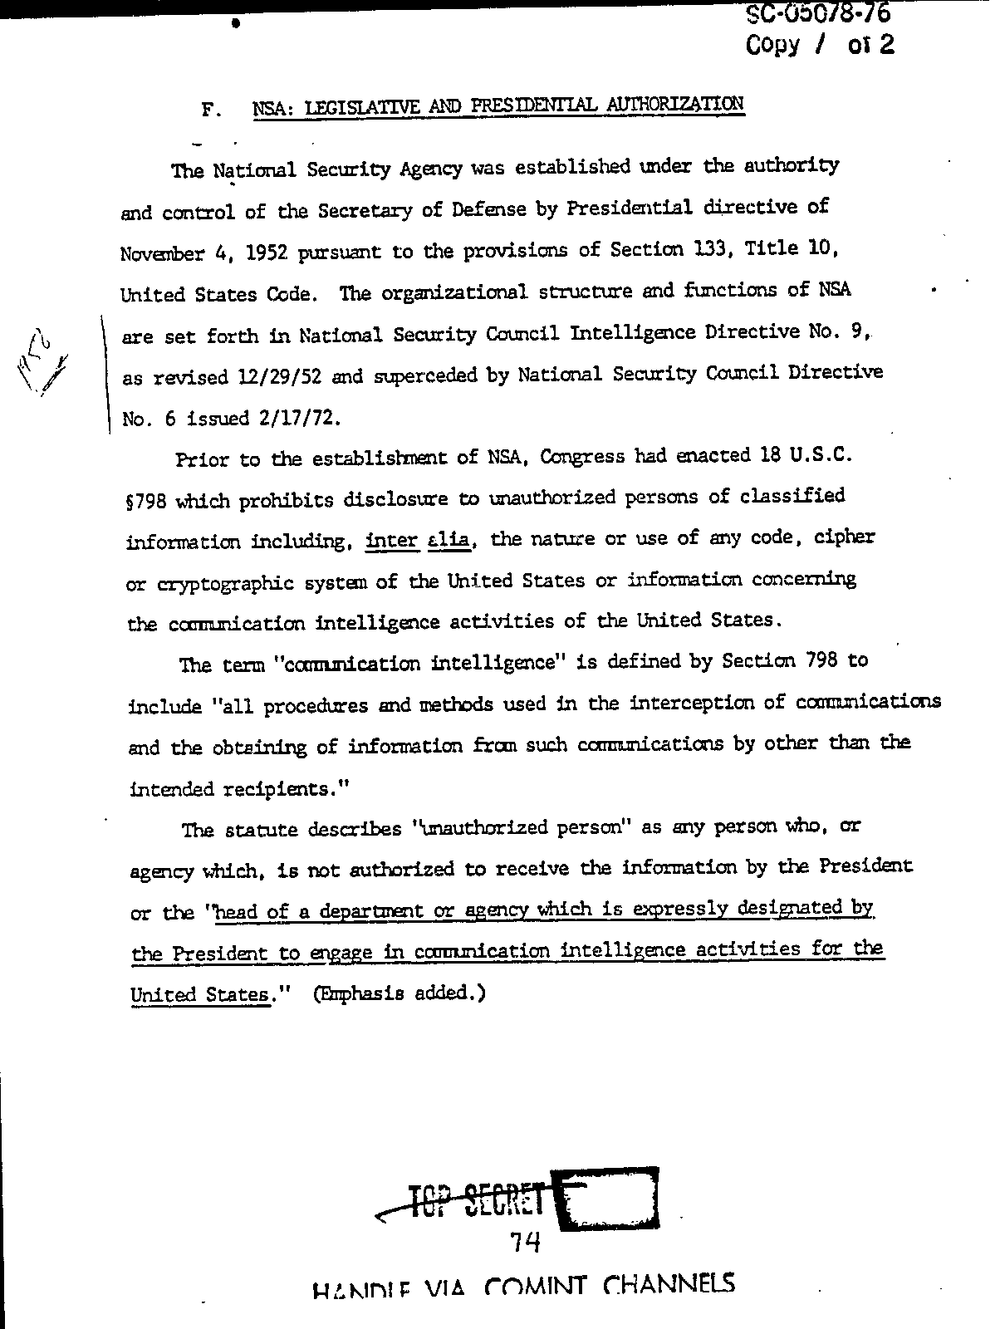 Page 82 from Report on Inquiry Into CIA Related Electronic Surveillance Activities